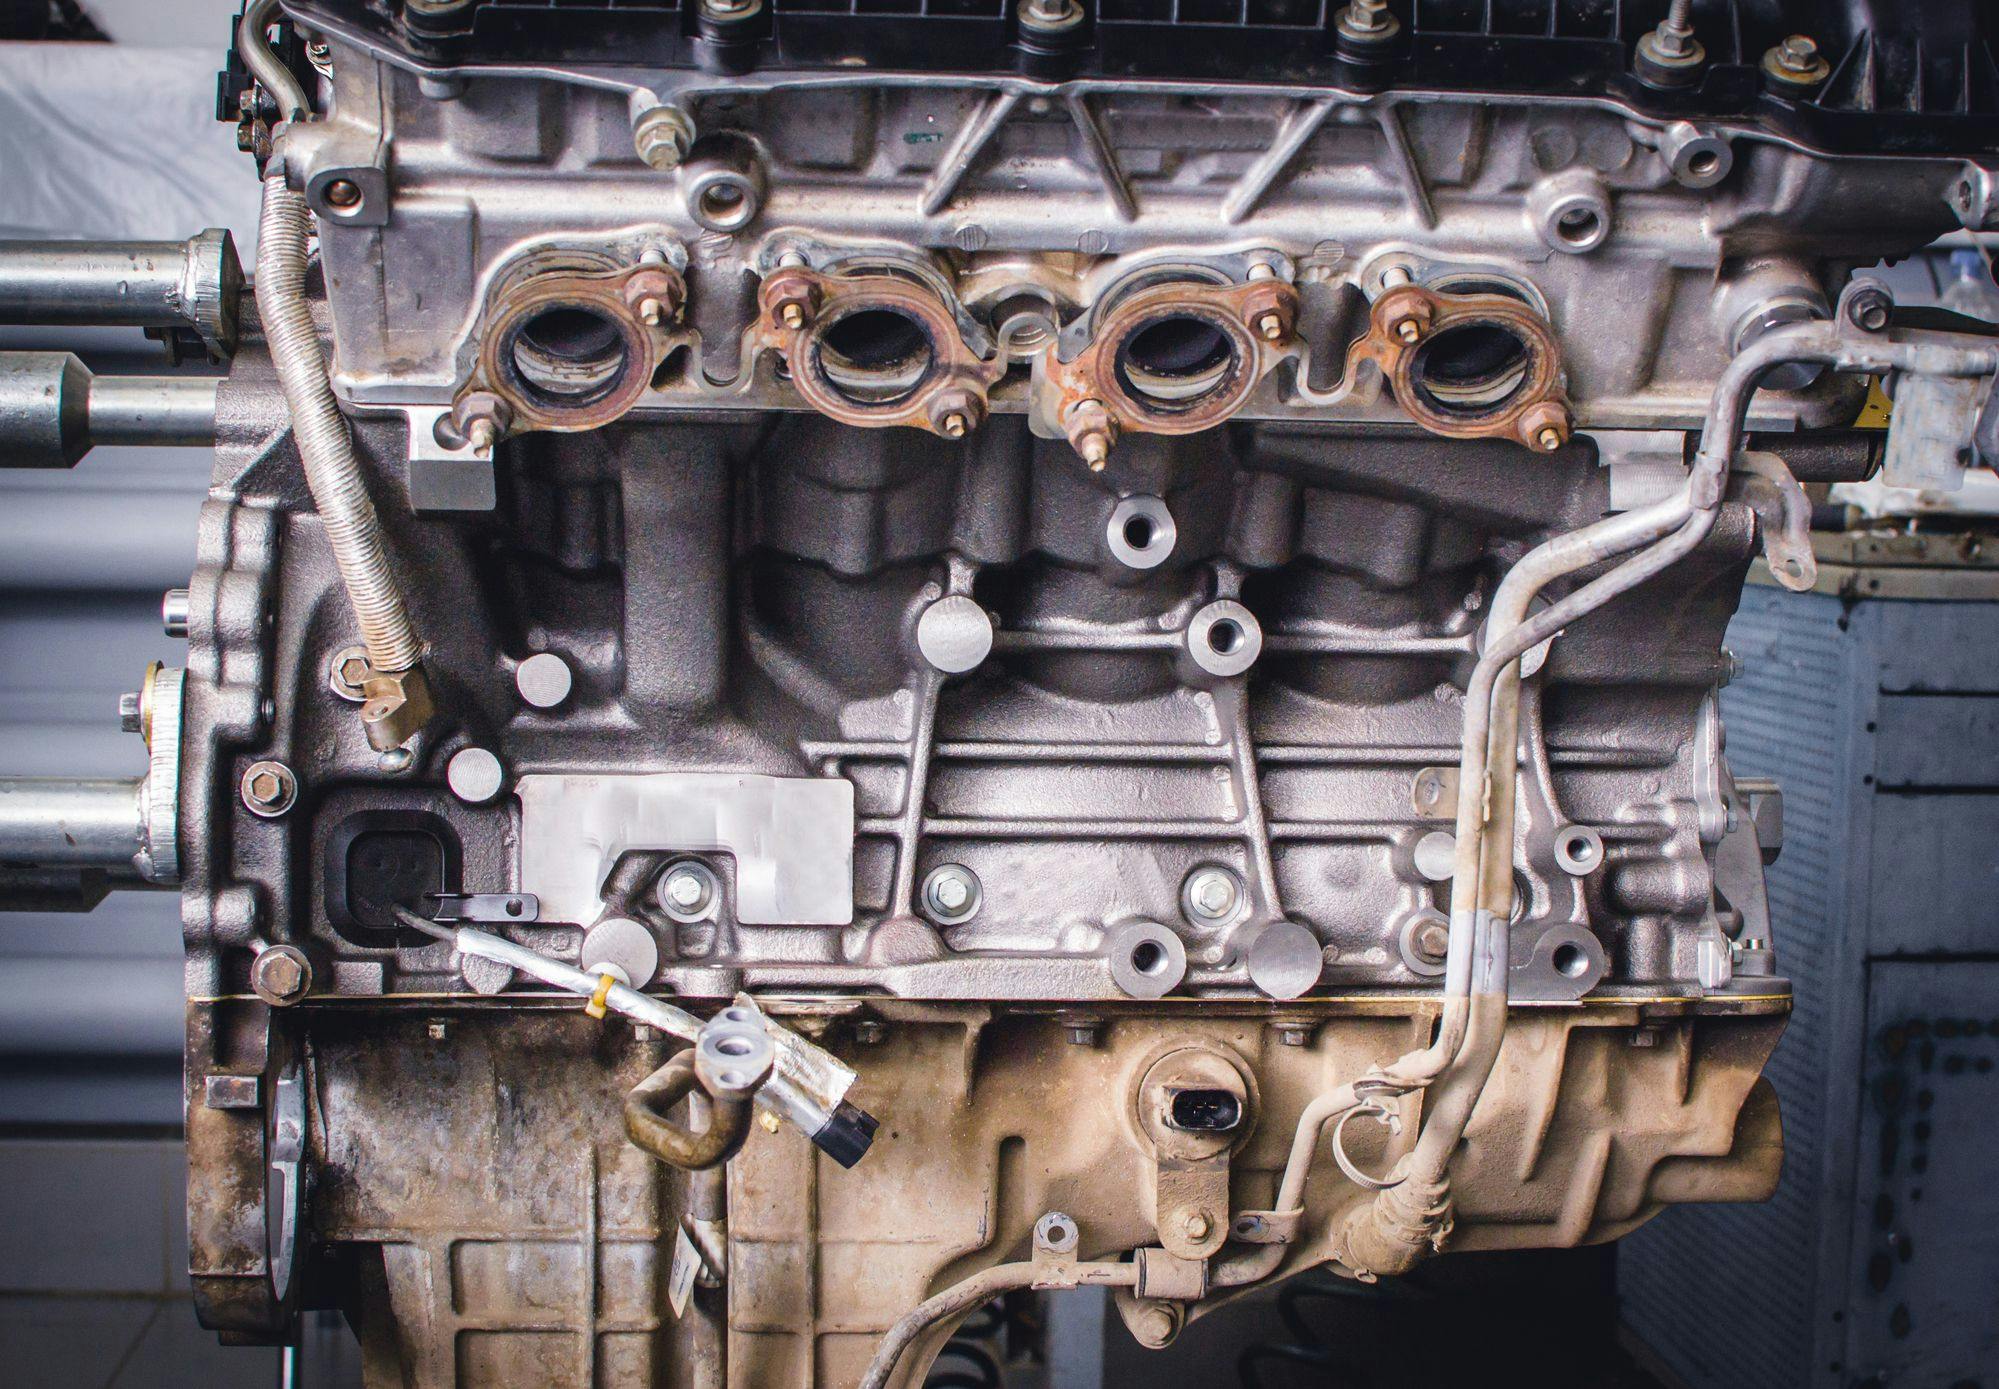 Explore common diesel engine problems and troubleshooting tips for Cummins ISX and Detroit DD15 engines. Ensure optimal performance and longevity.